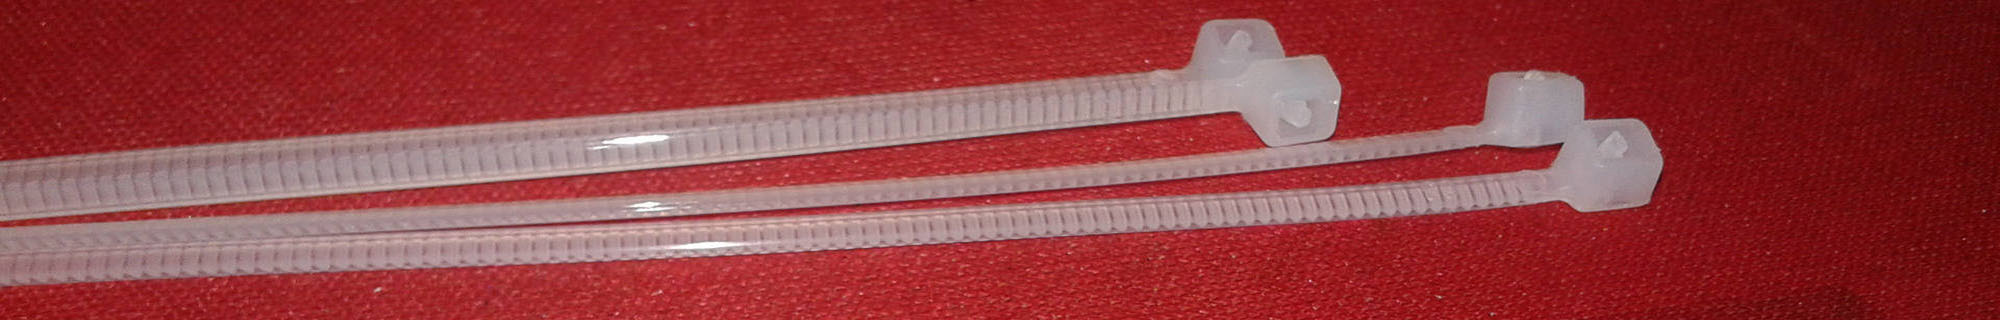 The Cable Tie 150mm, also known as a 6-inch Cable Tie. - Nylon Cable Ties